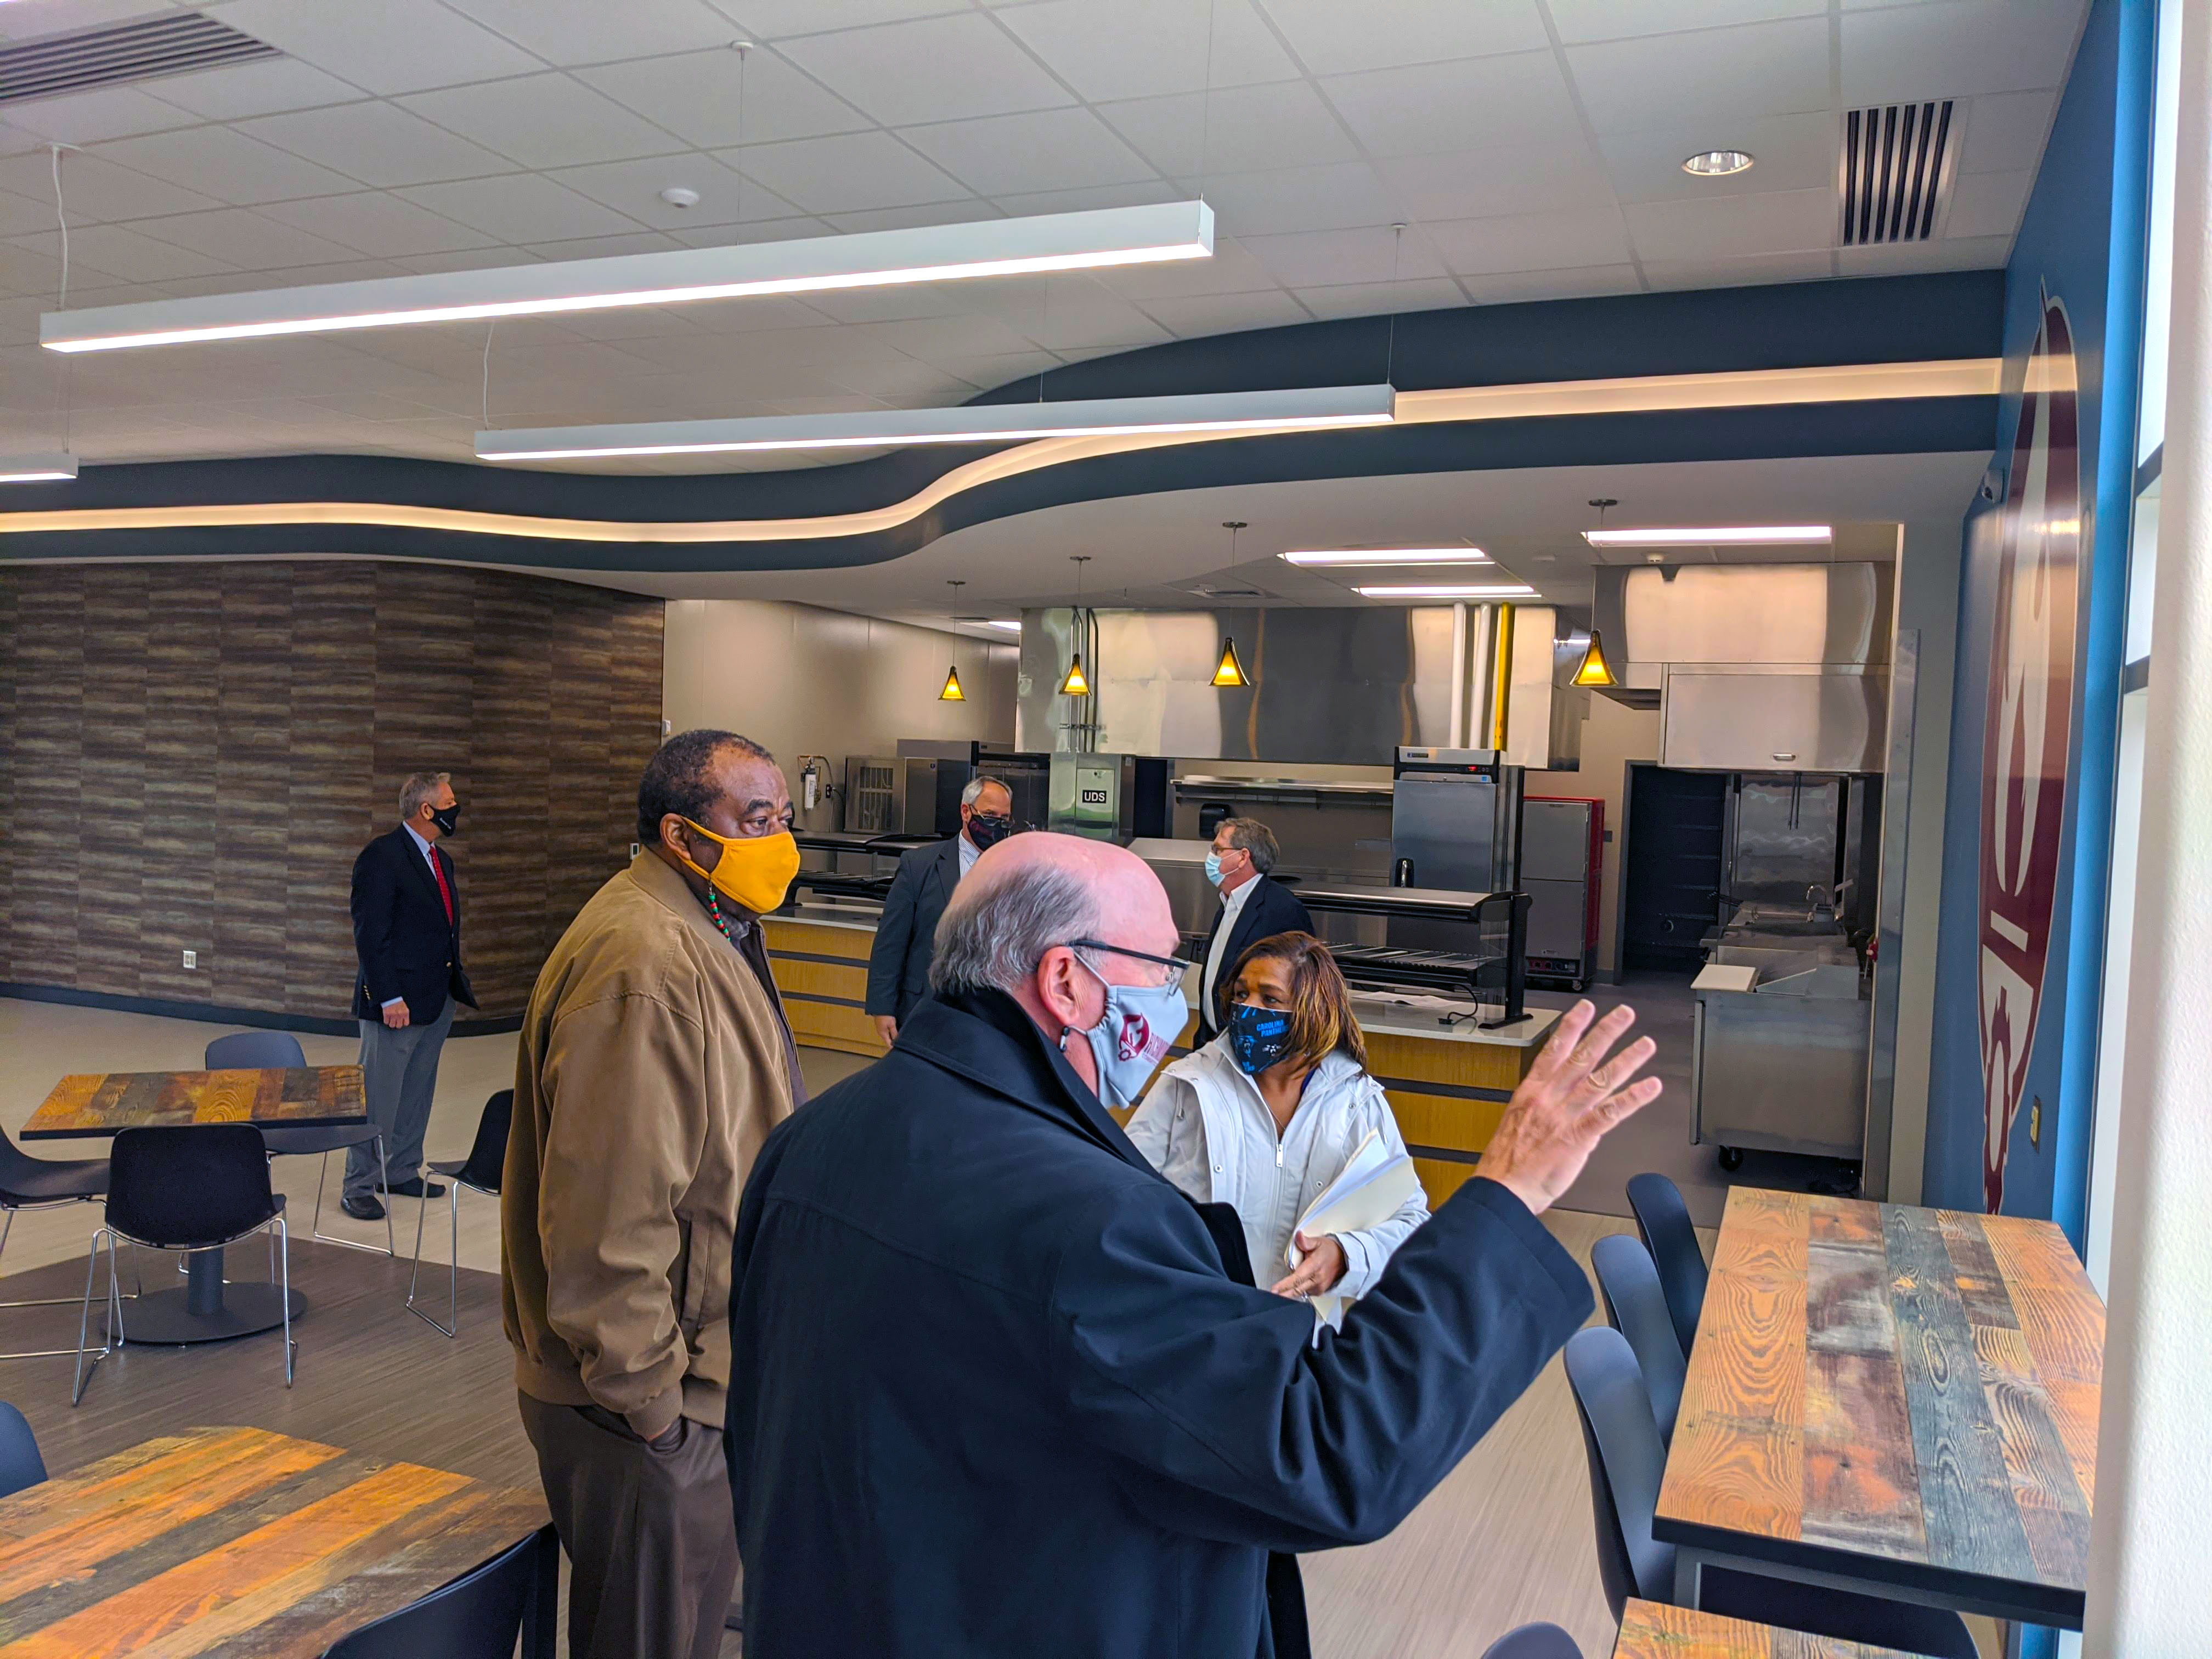 College President and Board of Trustees tour the student cafe